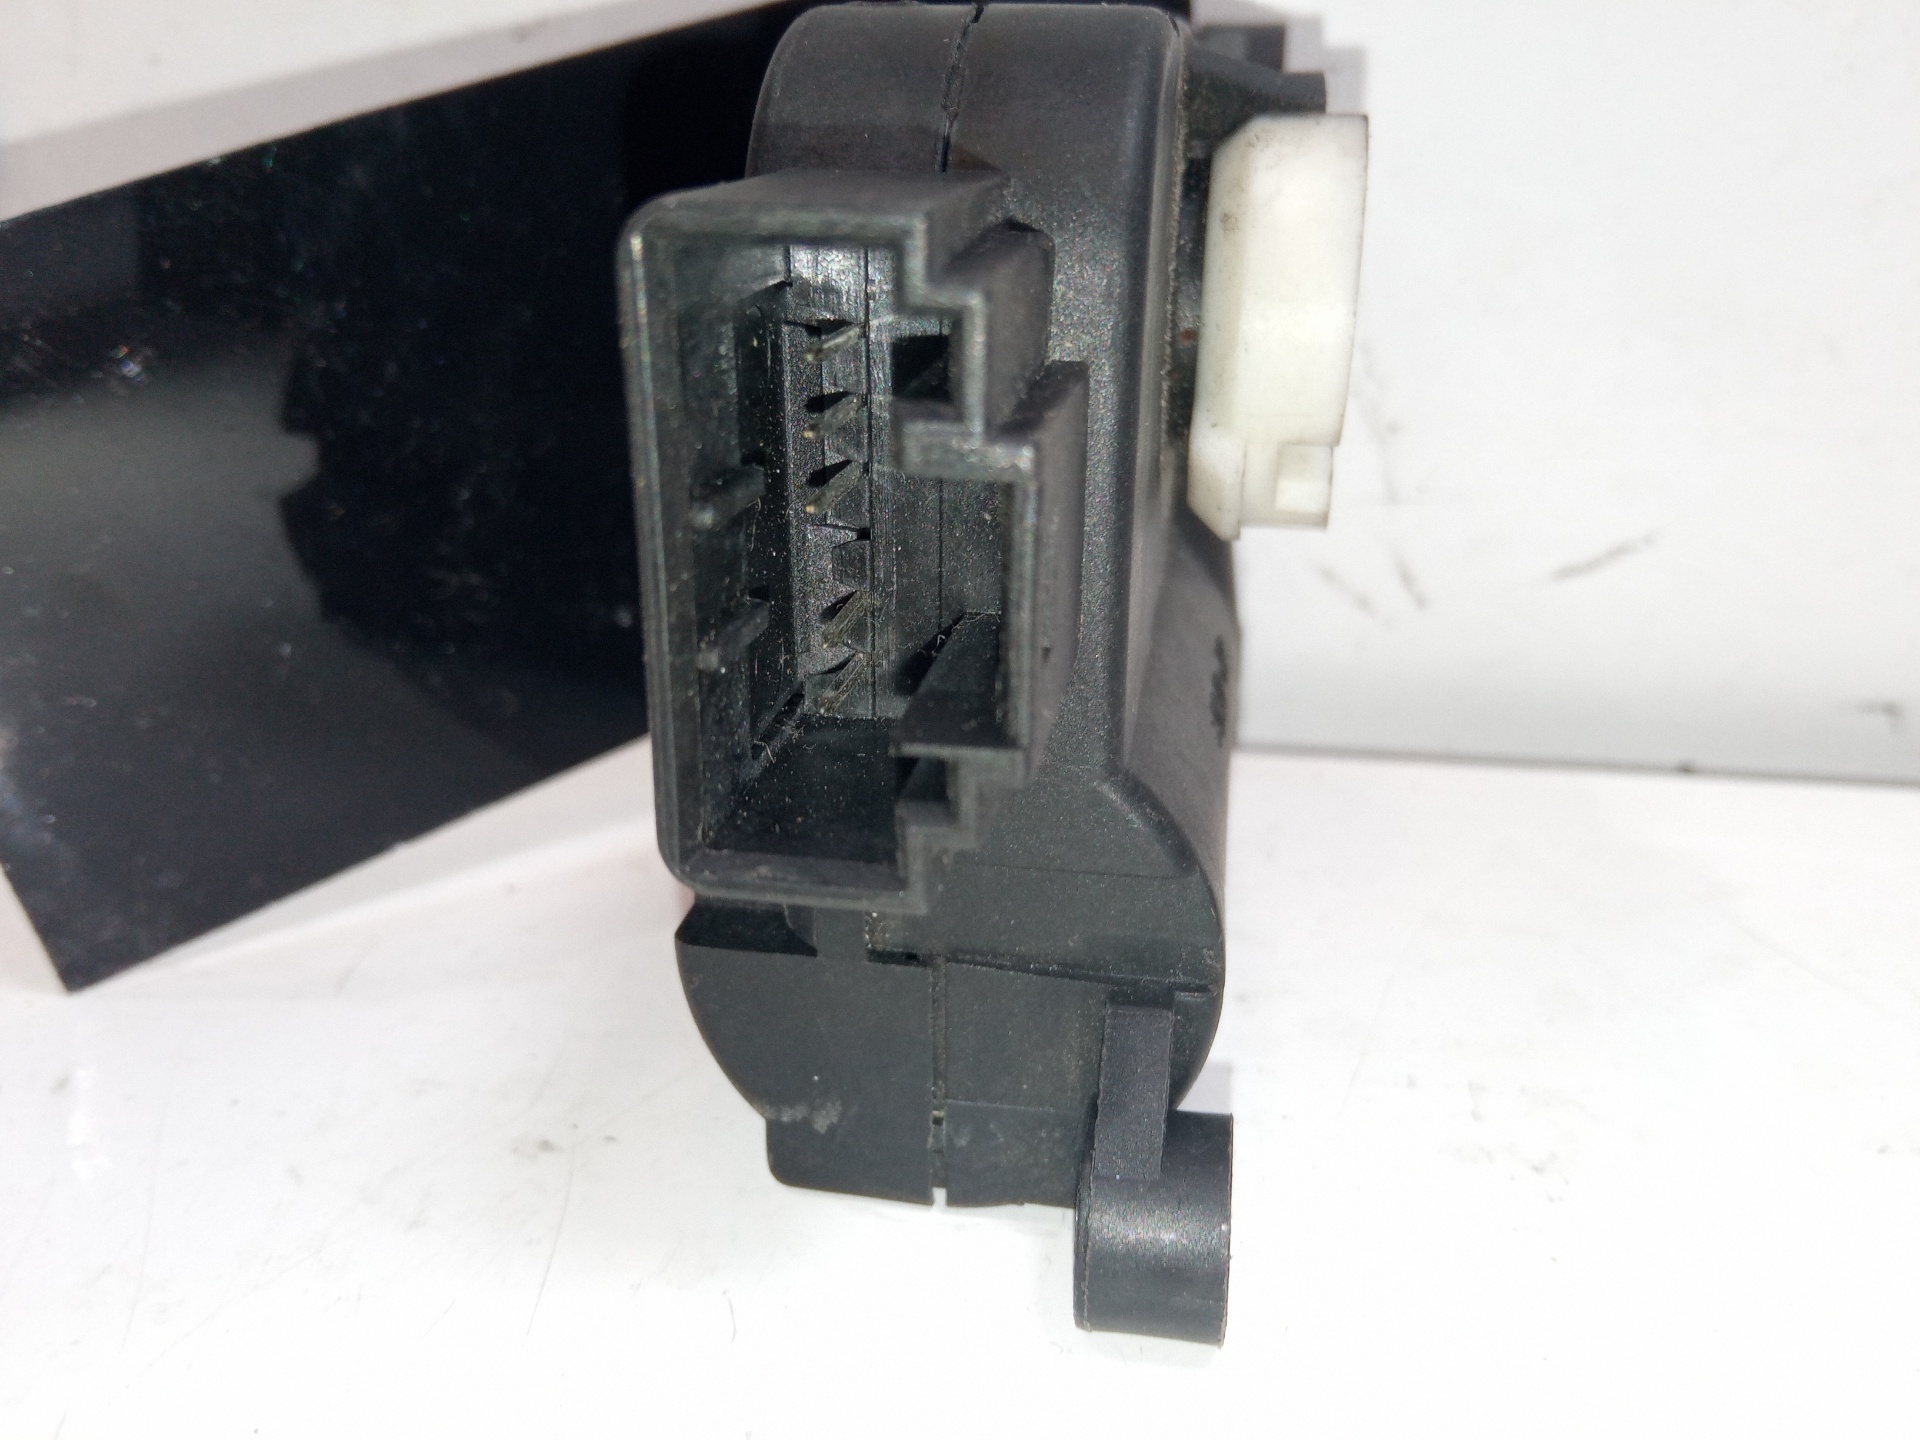 AUDI A6 C6/4F (2004-2011) Air Conditioner Air Flow Valve Motor 4F0820511A, 5PINES 24959121